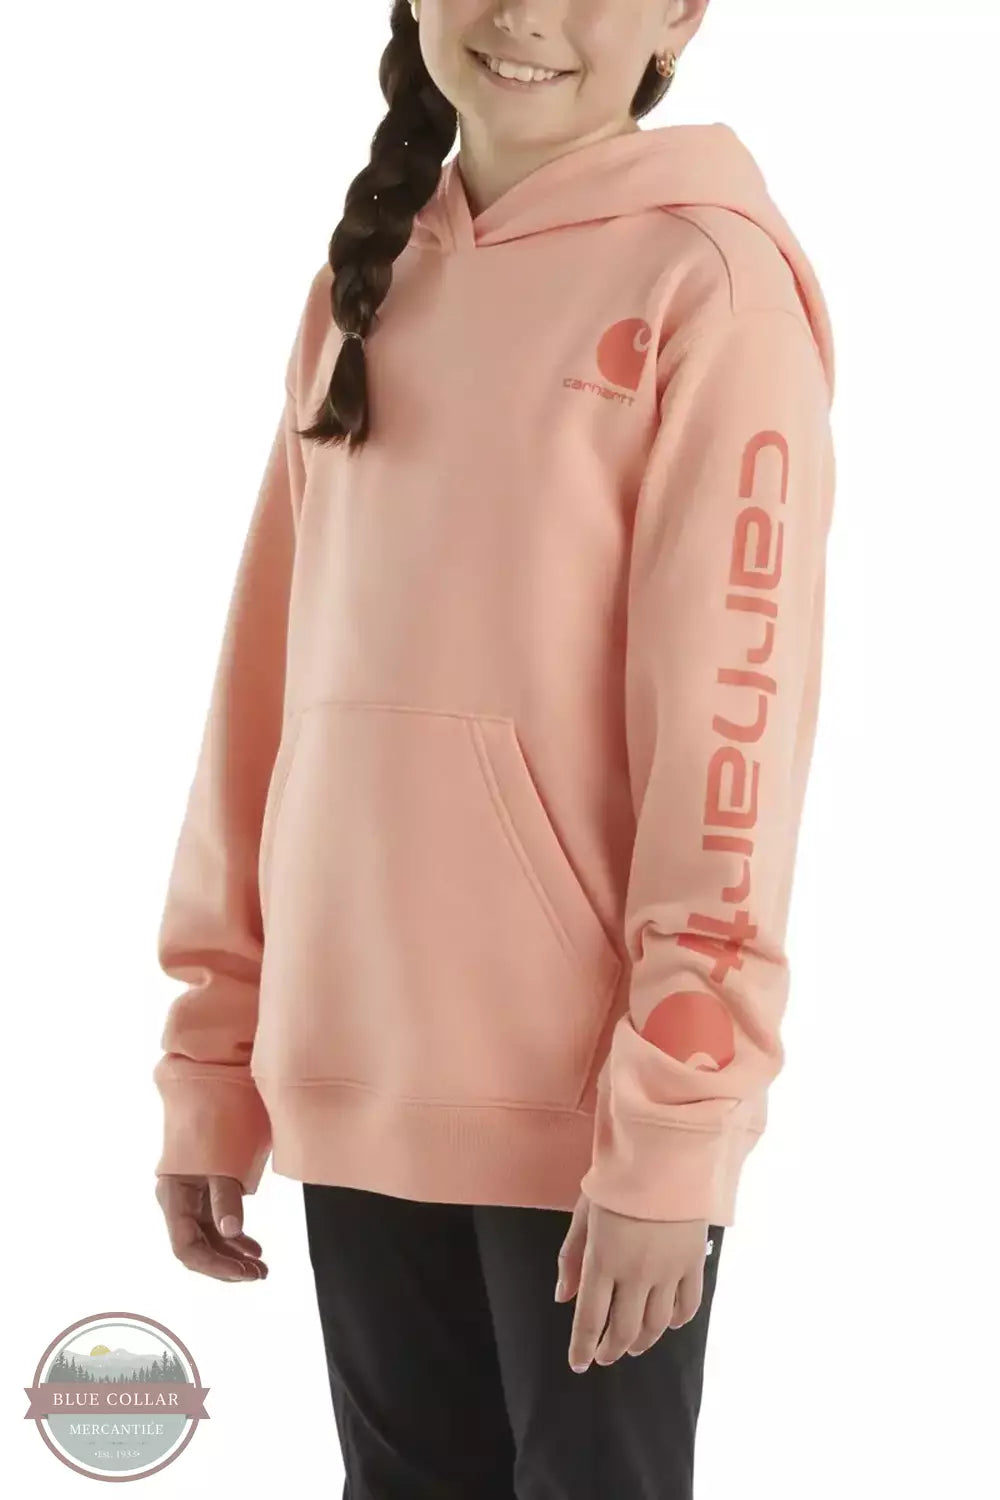 Carhartt CA9983-L193 Youth Long Sleeve Logo Graphic Hoodie Peach Amber Profile View